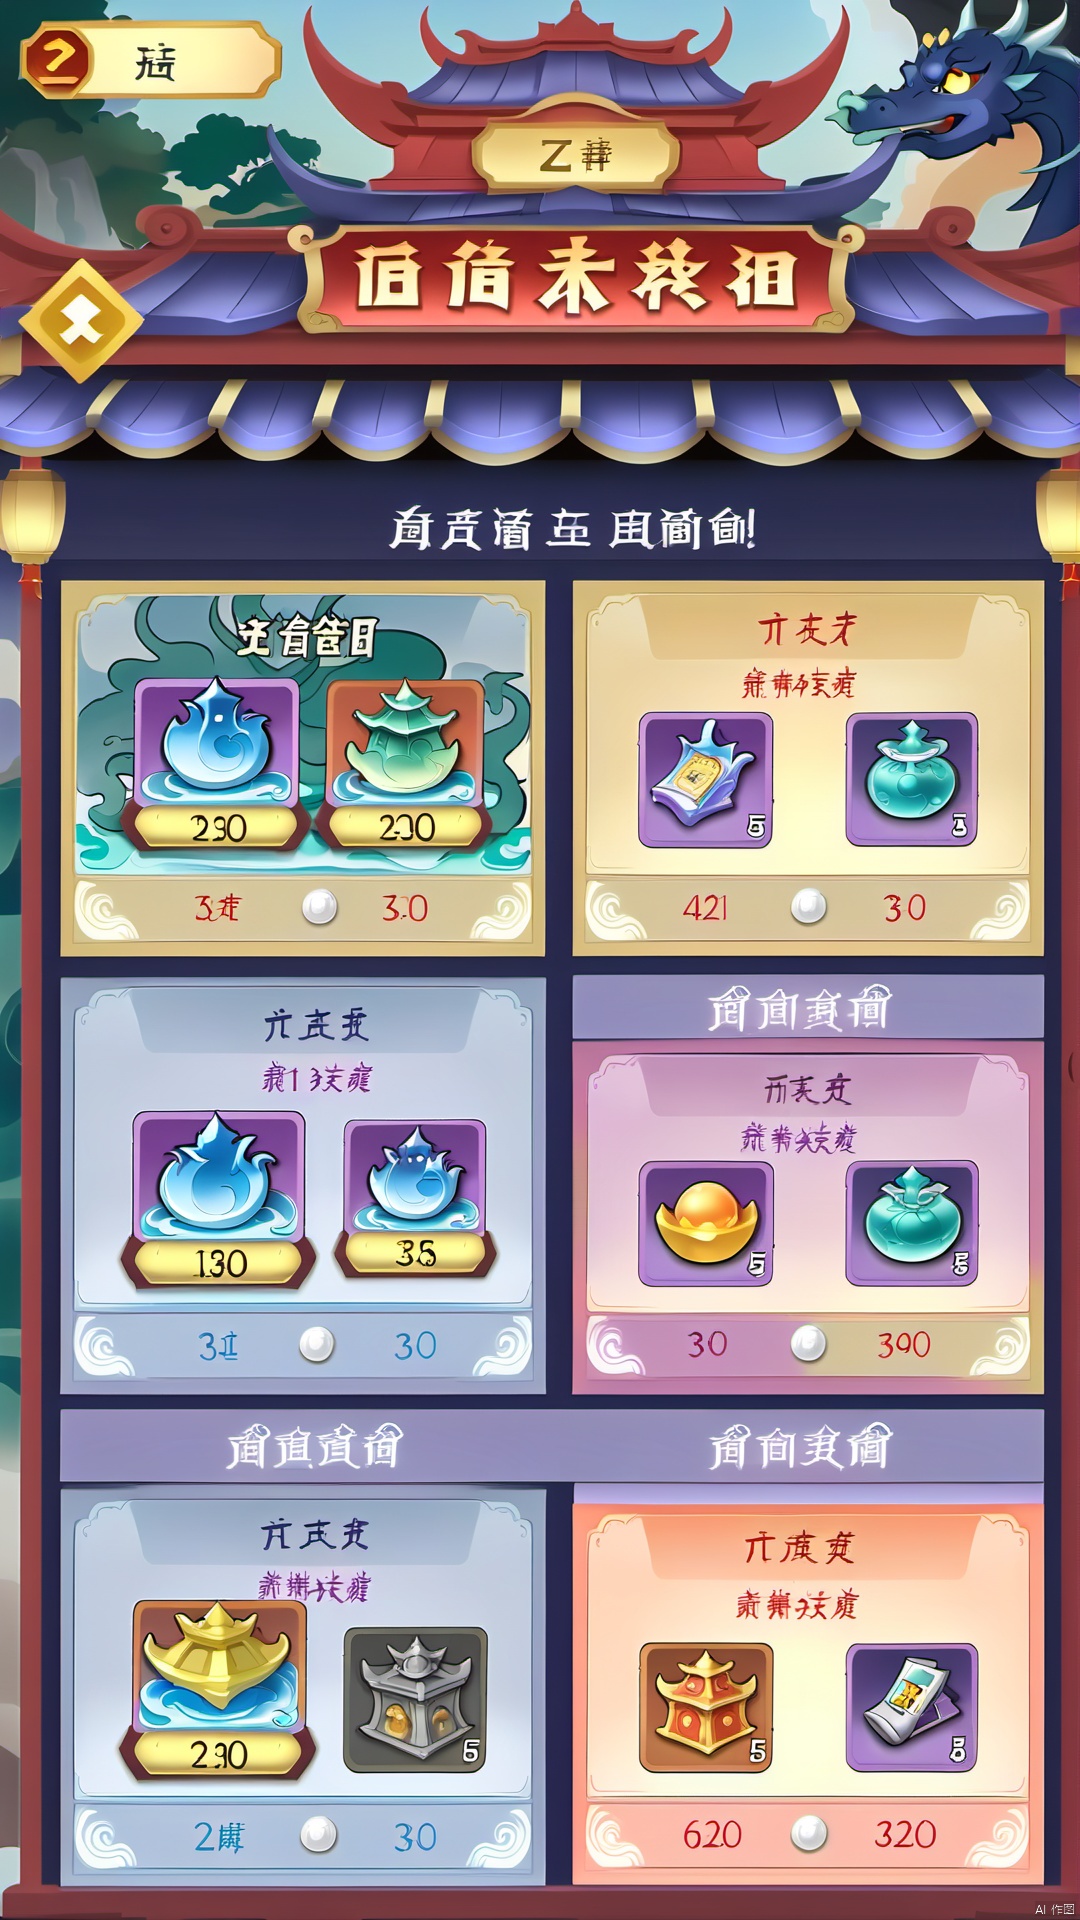 The fantasy ink-style activity interface shows the mysterious blue sea Dragon Palace: the water is sparkling,the coral is covered,the dragon Palace building is faintly visible. The circular taskbar and reward buttons are designed in waves and dragon patterns,and the dynamic effects of tumbling waves and flashing dragon shadows add visual impact when completing tasks. On the left is the Legend Wall of the Dragon Palace,which displays mythological stories and ink paintings related to the Dragon Palace. The activity shop on the right,designed as a round conch,offers activity-limited Dragon Palace treasures and ink scroll rewards